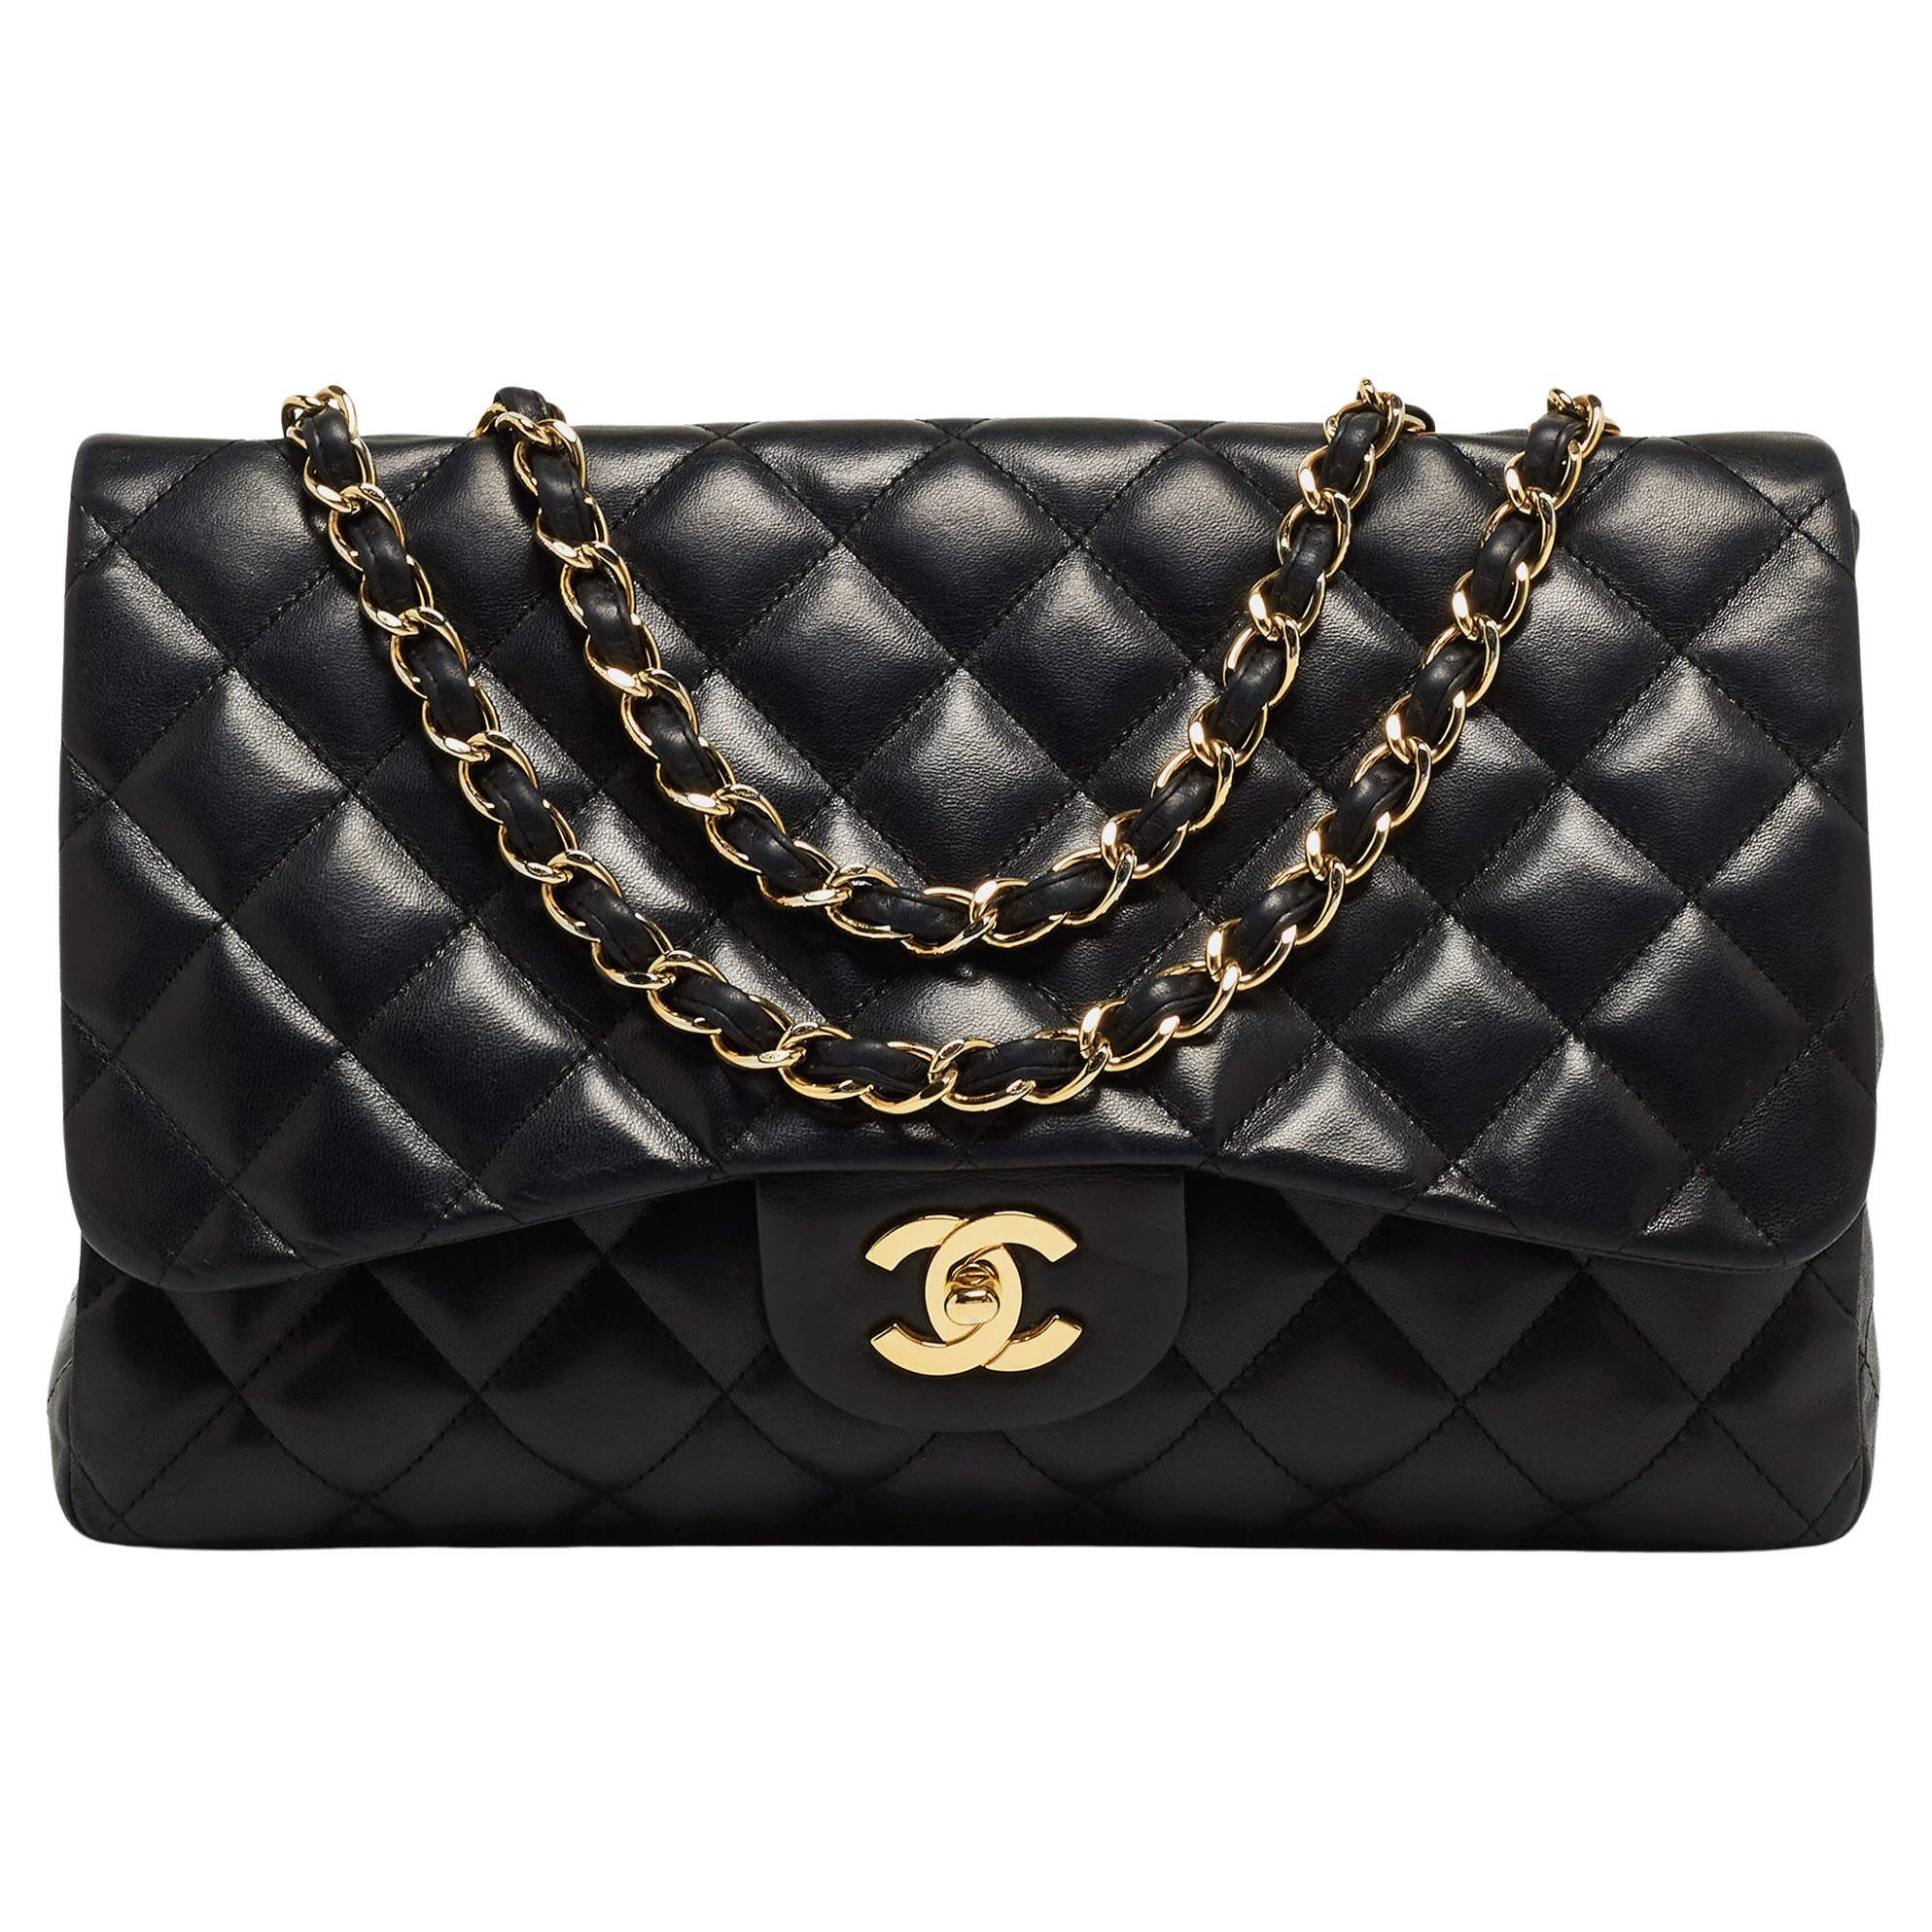 Chanel Black Quilted Leather Jumbo Classic Single Flap Bag For Sale